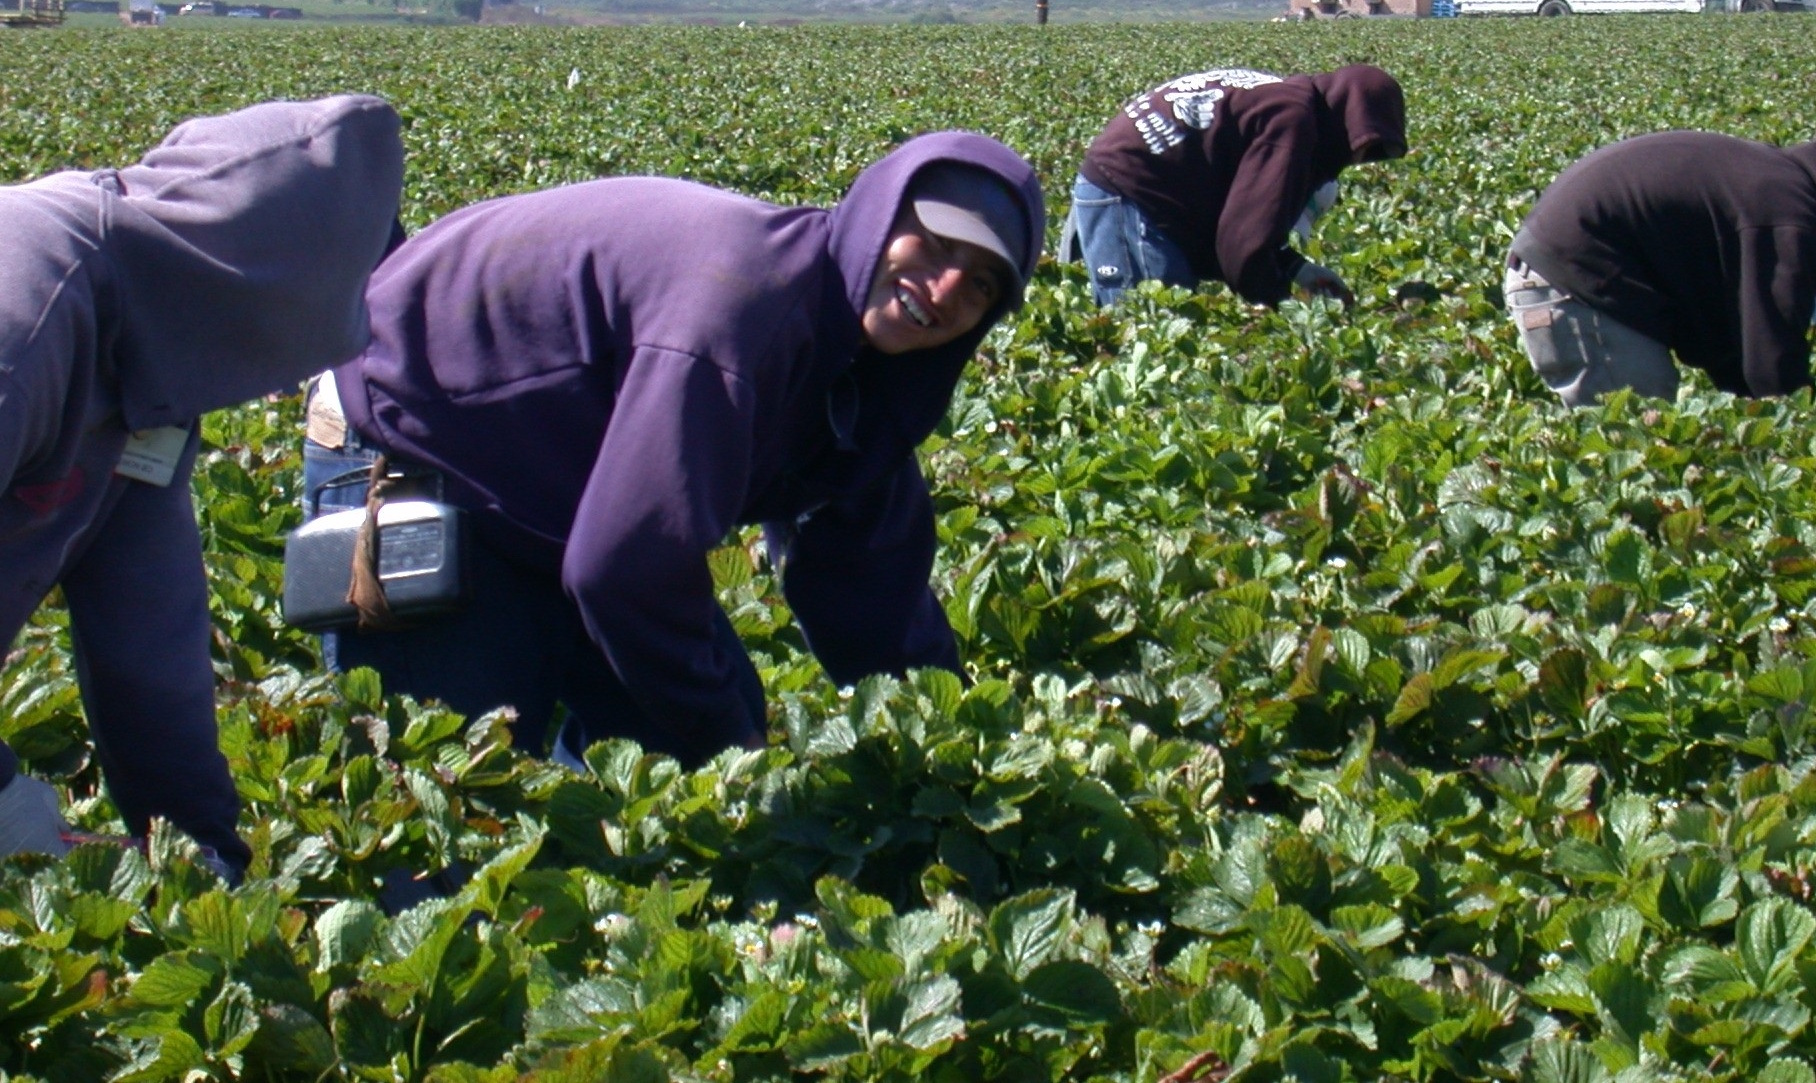 Seasonal Workers face ongoing exploitation as government shows little interest in enforcement